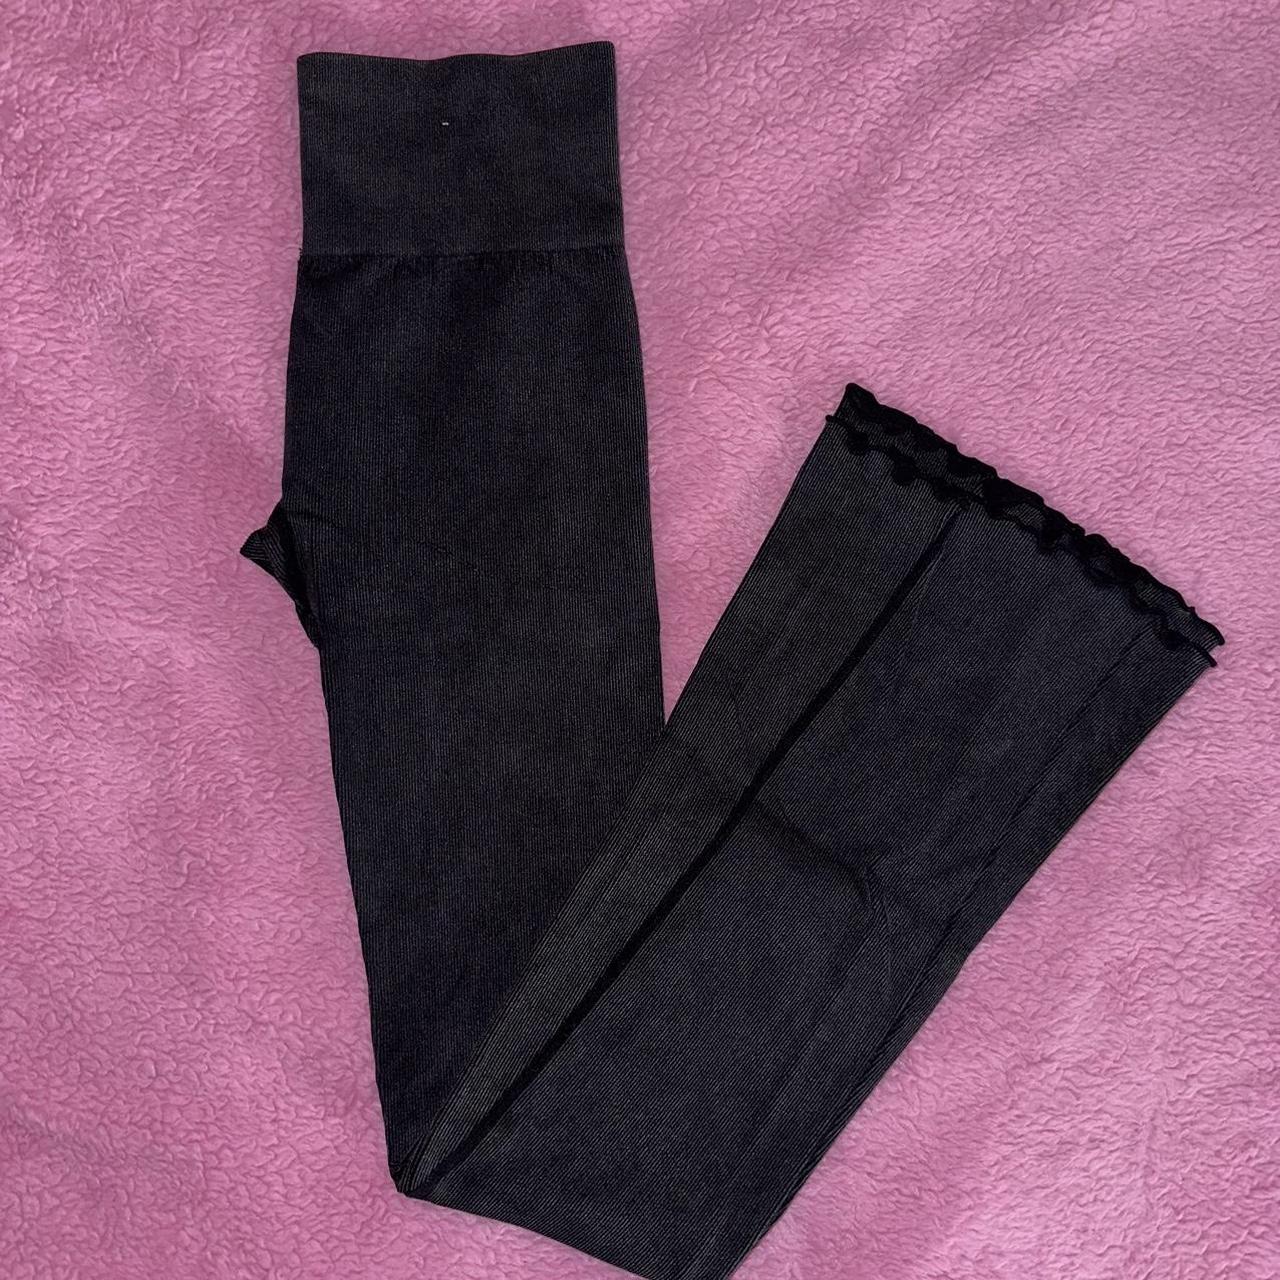 Black yoga pants. Really tight fitting and will make... - Depop